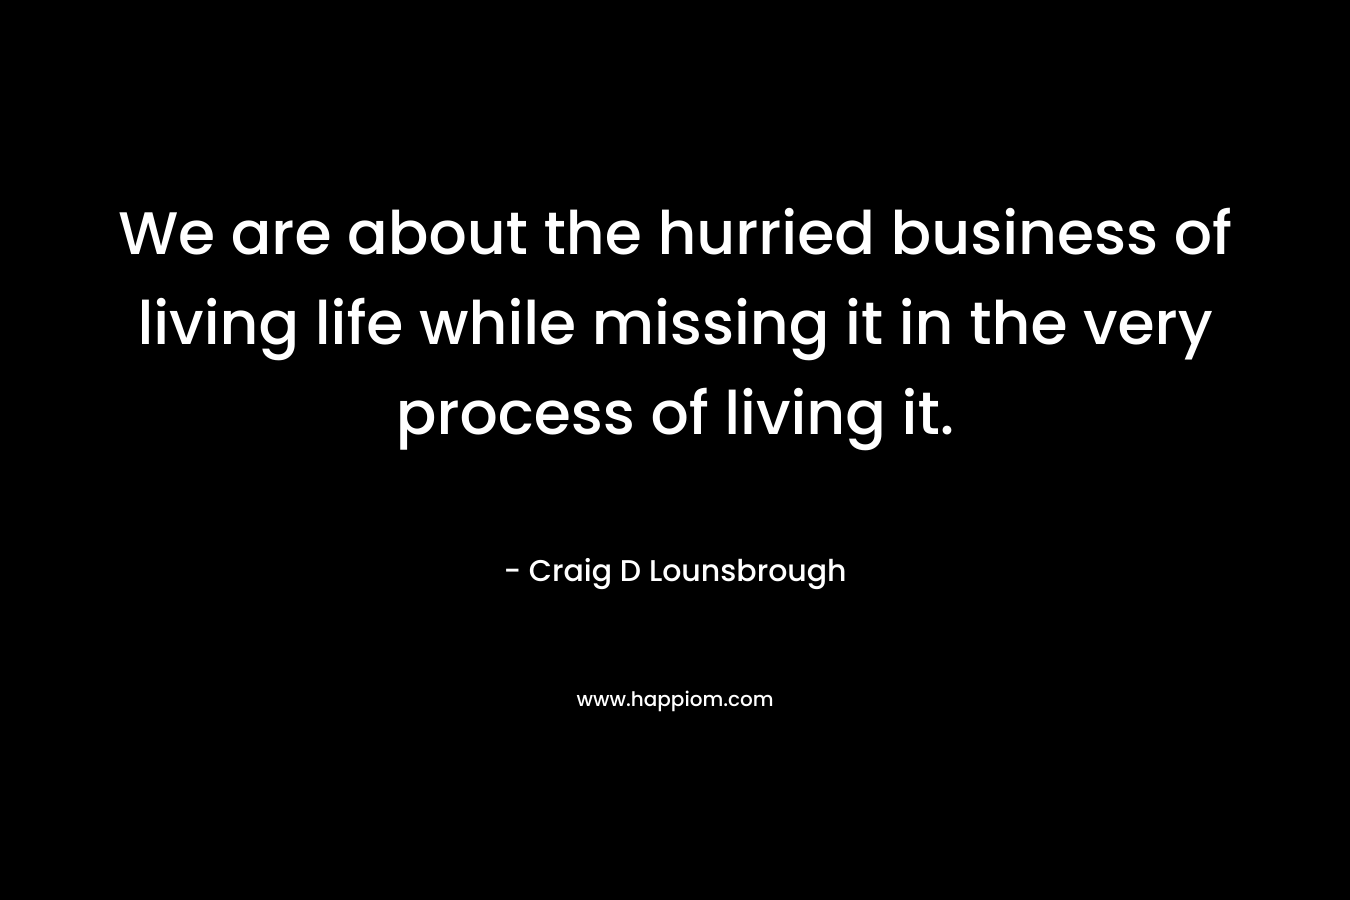 We are about the hurried business of living life while missing it in the very process of living it.